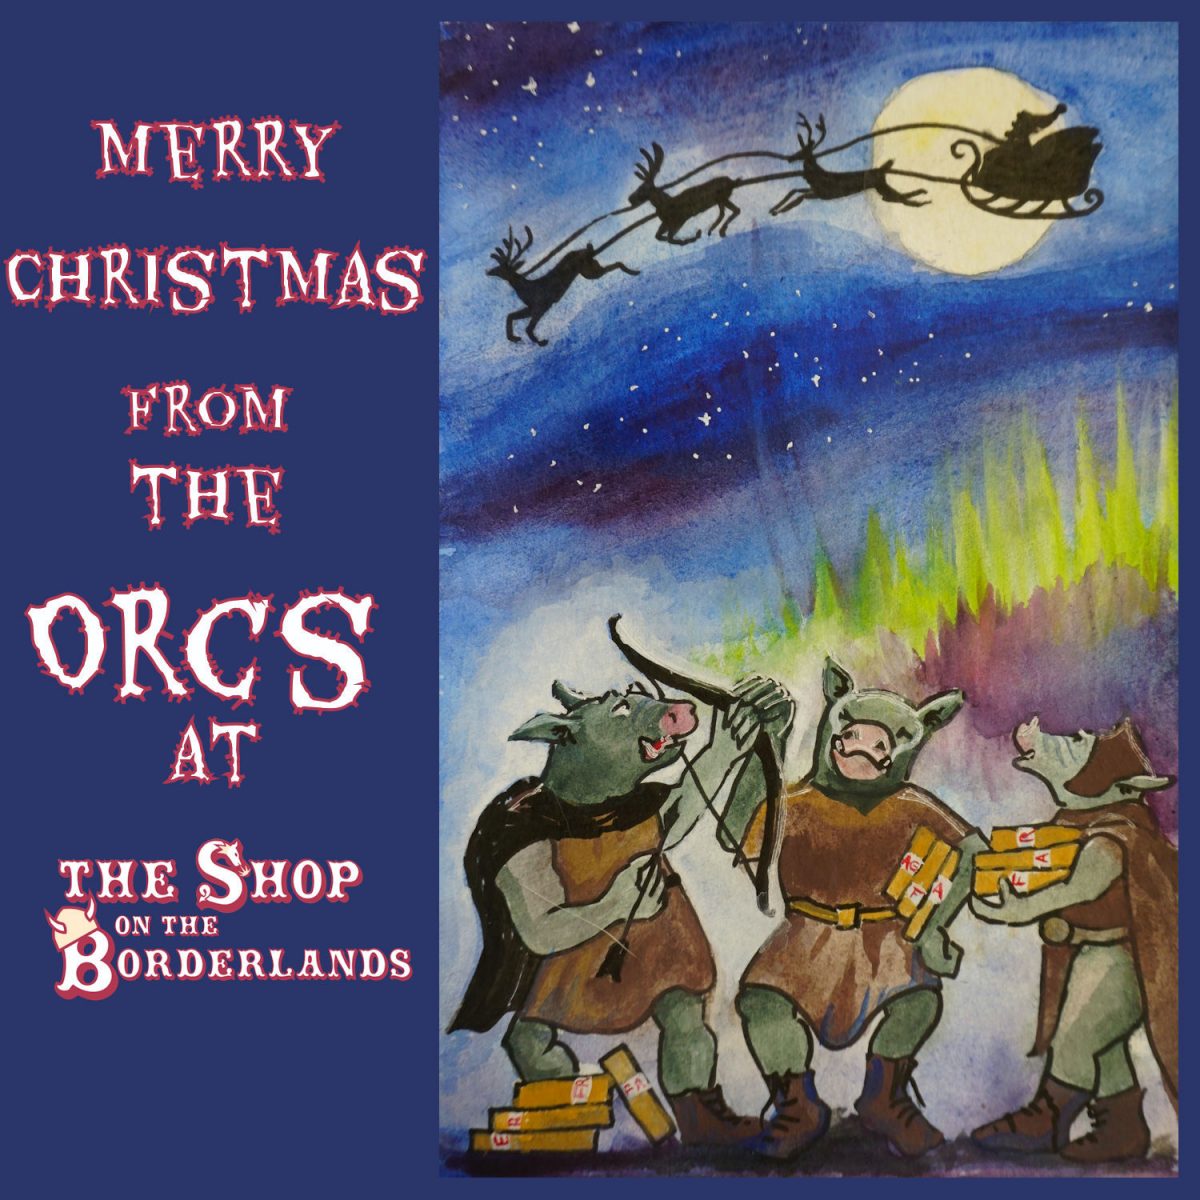 Merry Christmas from the Orcs!